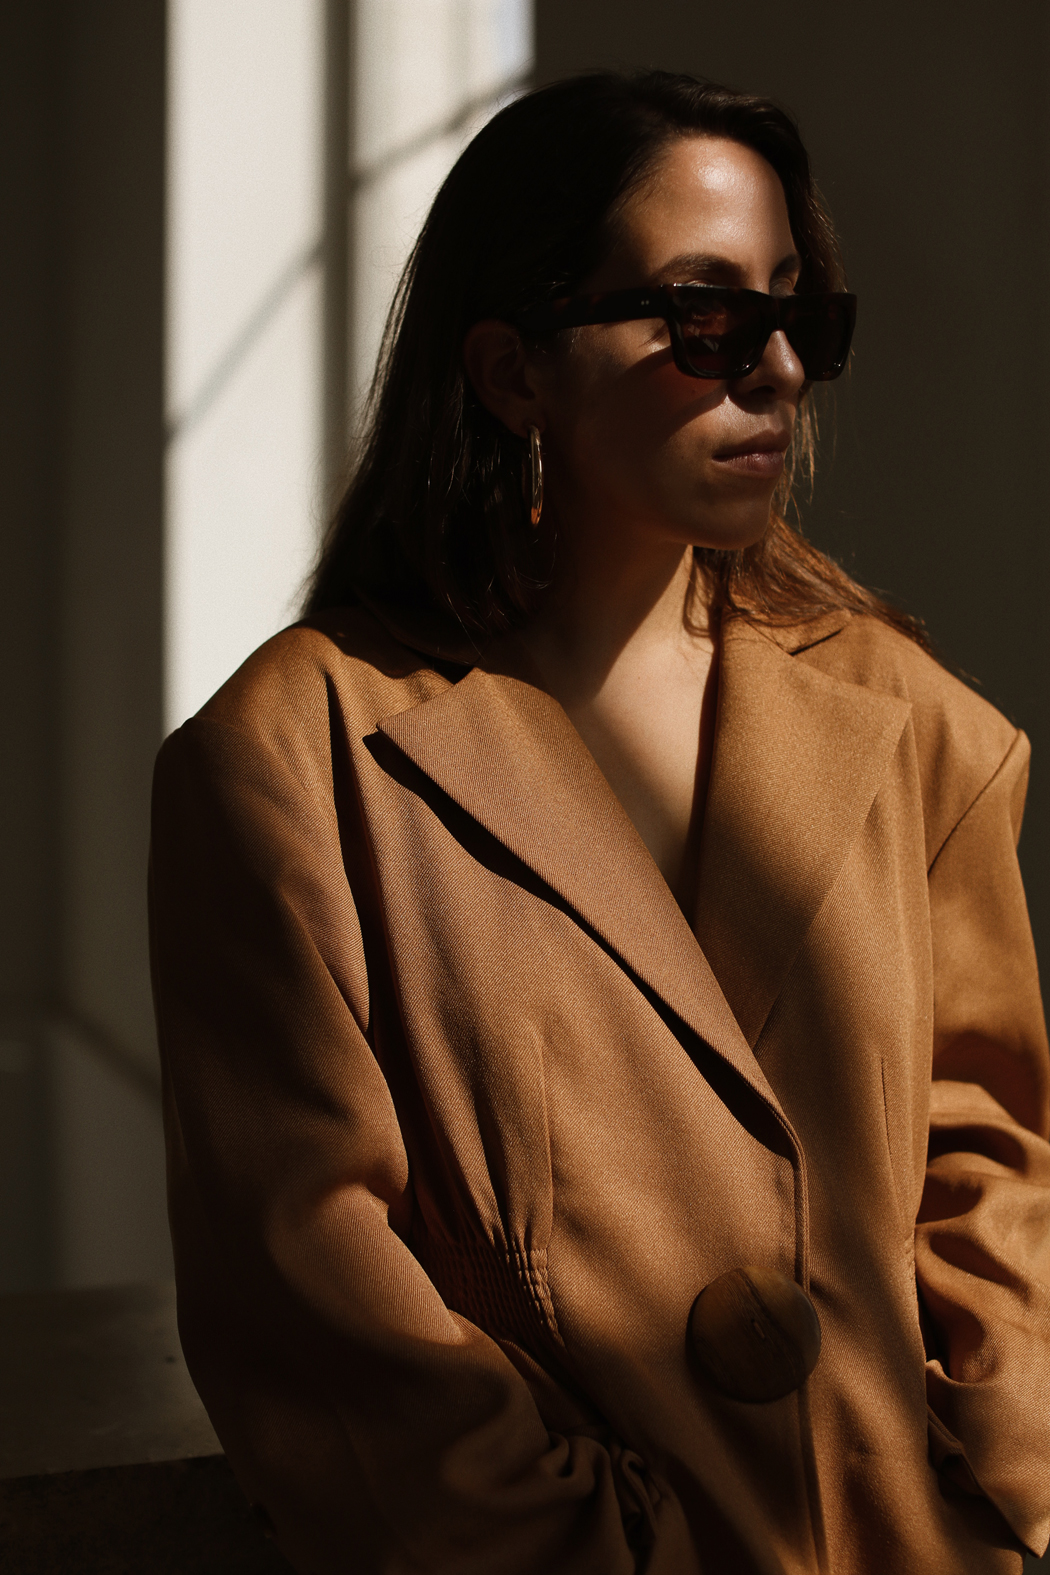 The Look: Outfit wearing the JH ZANE Pina Jacket - by Fiona Dinkelbach